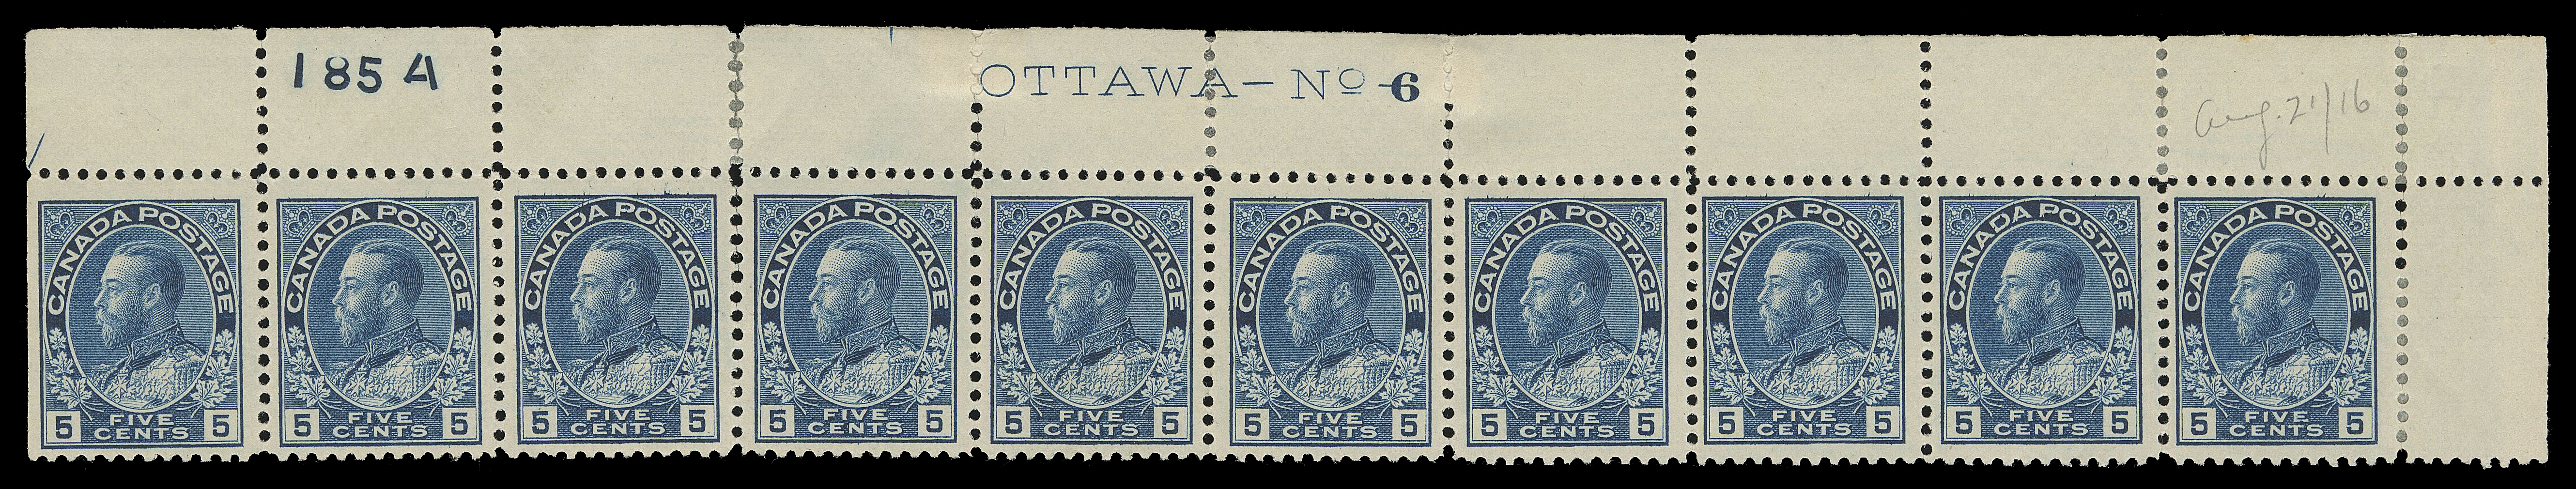 ADMIRAL STAMPS  111,An attractive, very scarce upper right Plate 6 strip of ten with boldly etched printing order number "185A" at left; partly severed between third and fourth columns, minor perf separation in selvedge supported by hinges, right pair LH, other eight NH; pencil "Aug 21 /16" date of acquisition, F-VF (Unitrade cat. $4,530)

Provenance: George Marler, Maresch Sale 143, September 1982; Lot 343